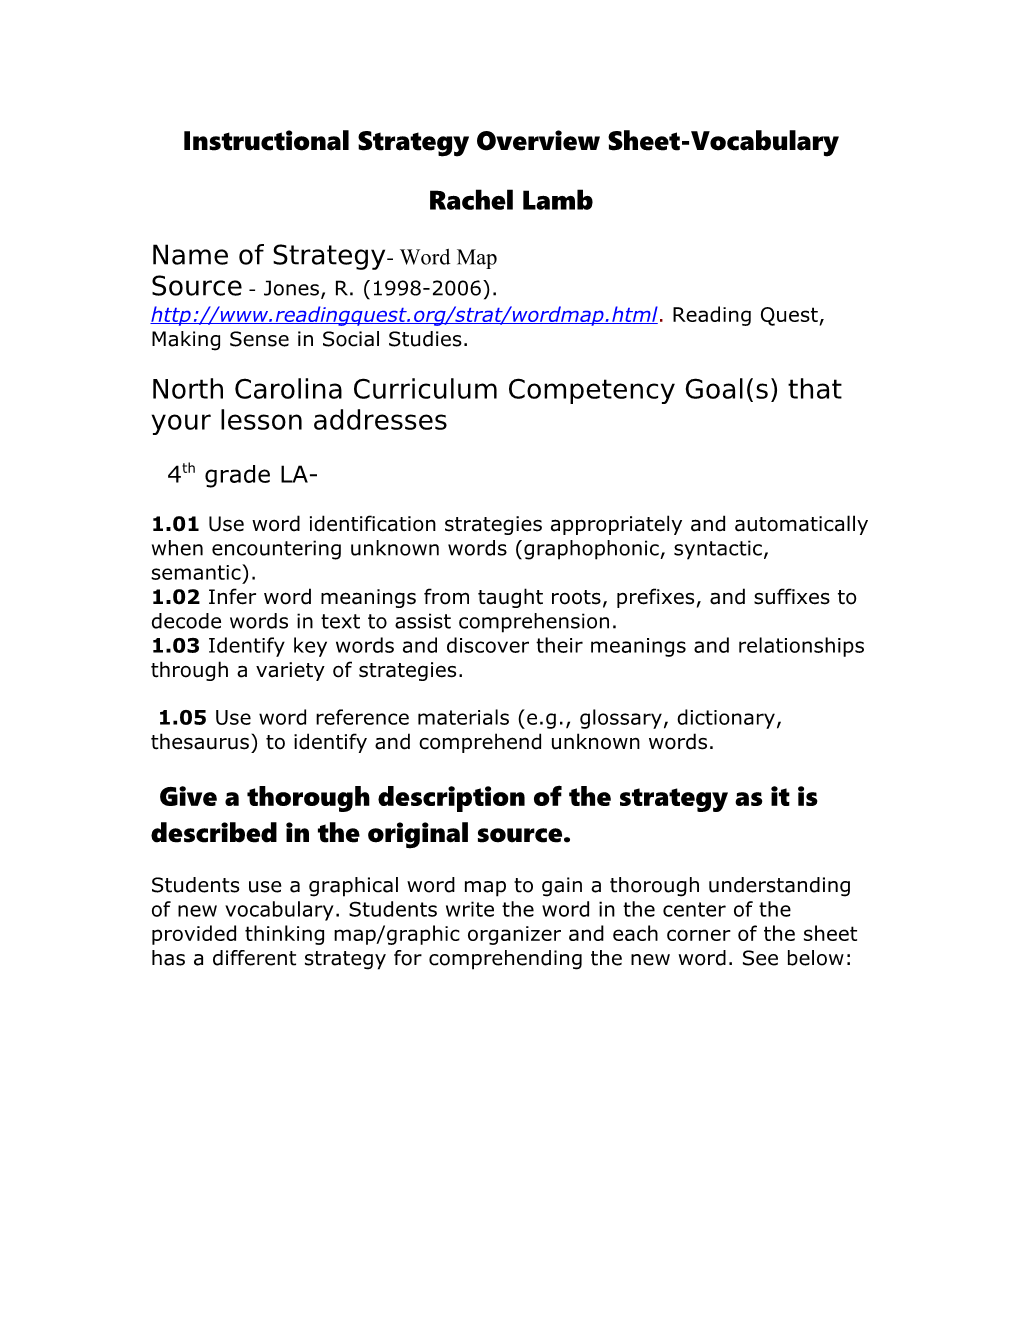 Instructional Strategy Overview Sheet-Vocabulary